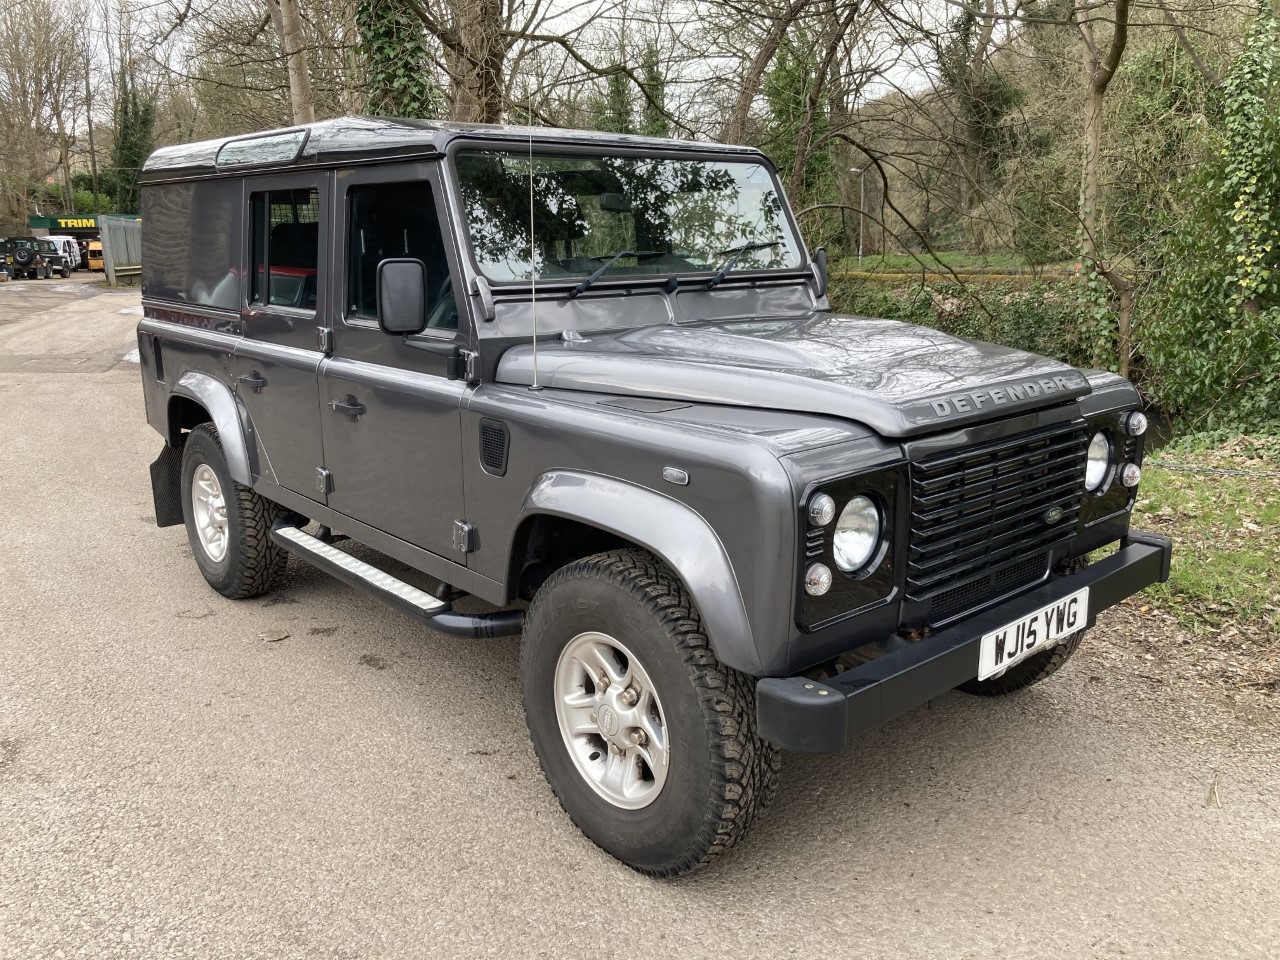 New - 2015 Land Rover Defender 110 Station Wagon Utility - 24,500 miles !! - Land Rover